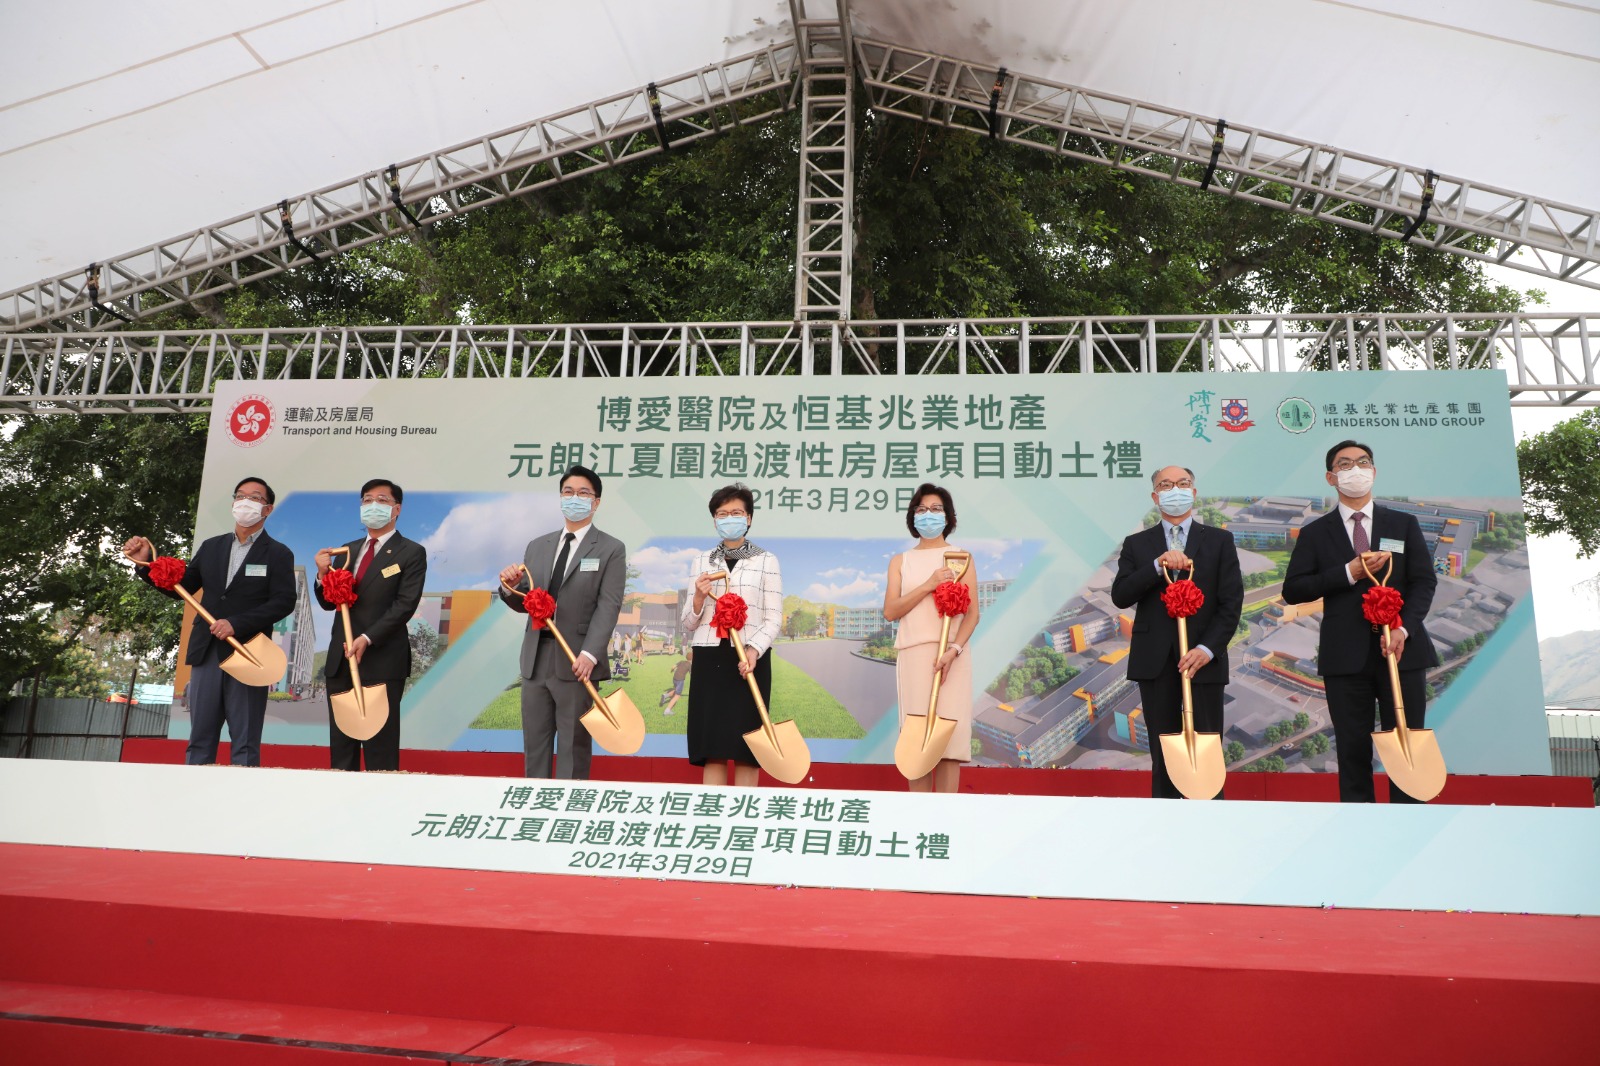 Ground-breaking Ceremony officiated by Chief Executive Carrie Lam